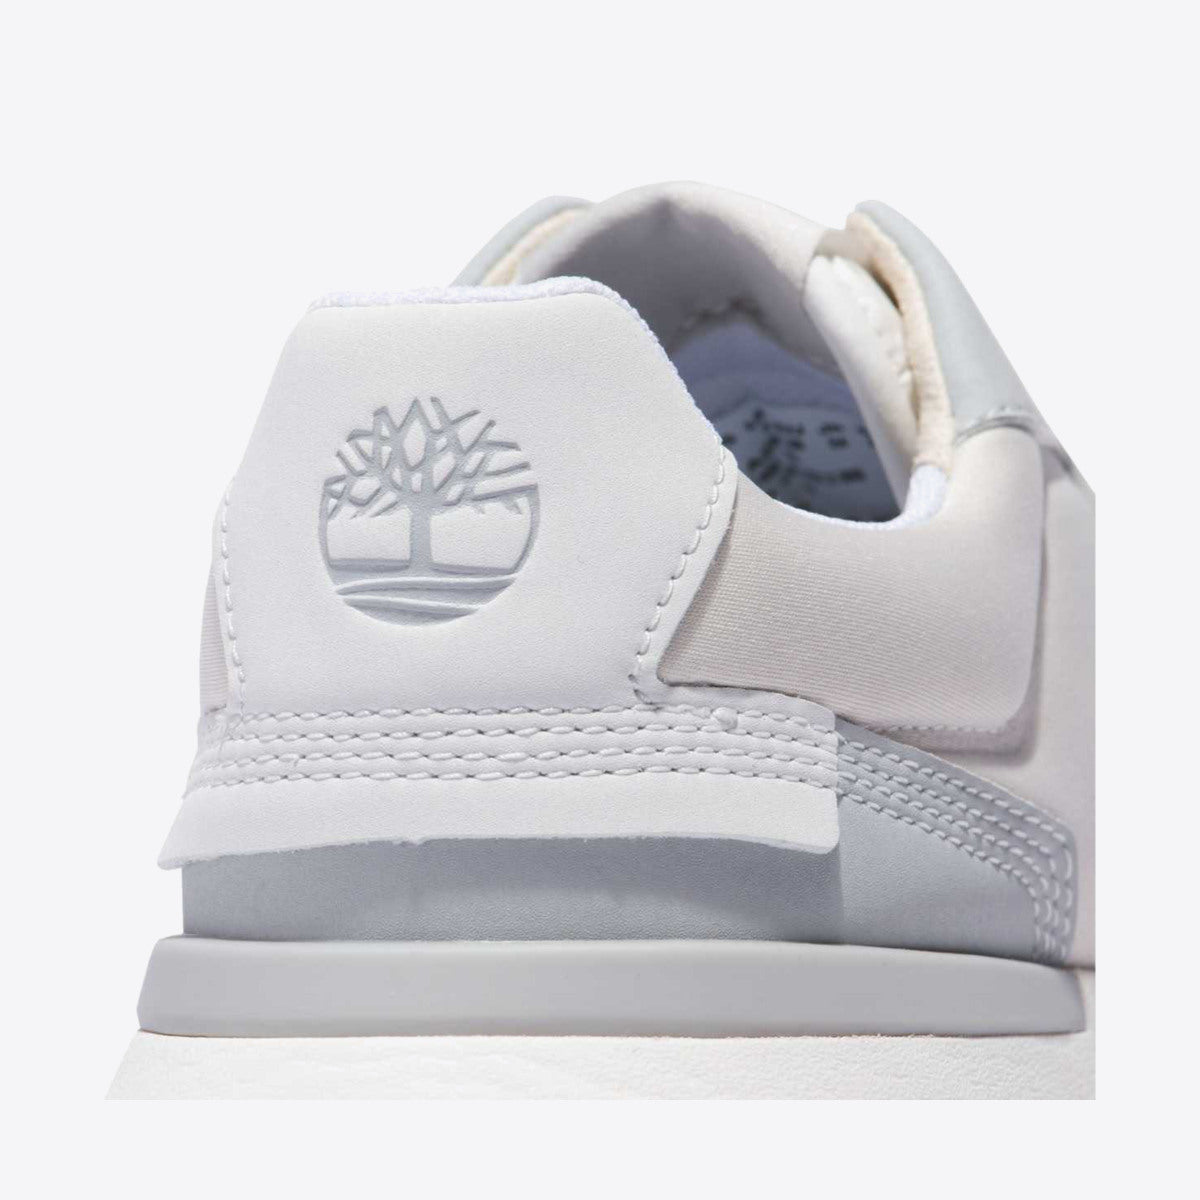 TIMBERLAND Seoul City Sneaker White Suede - Image 9